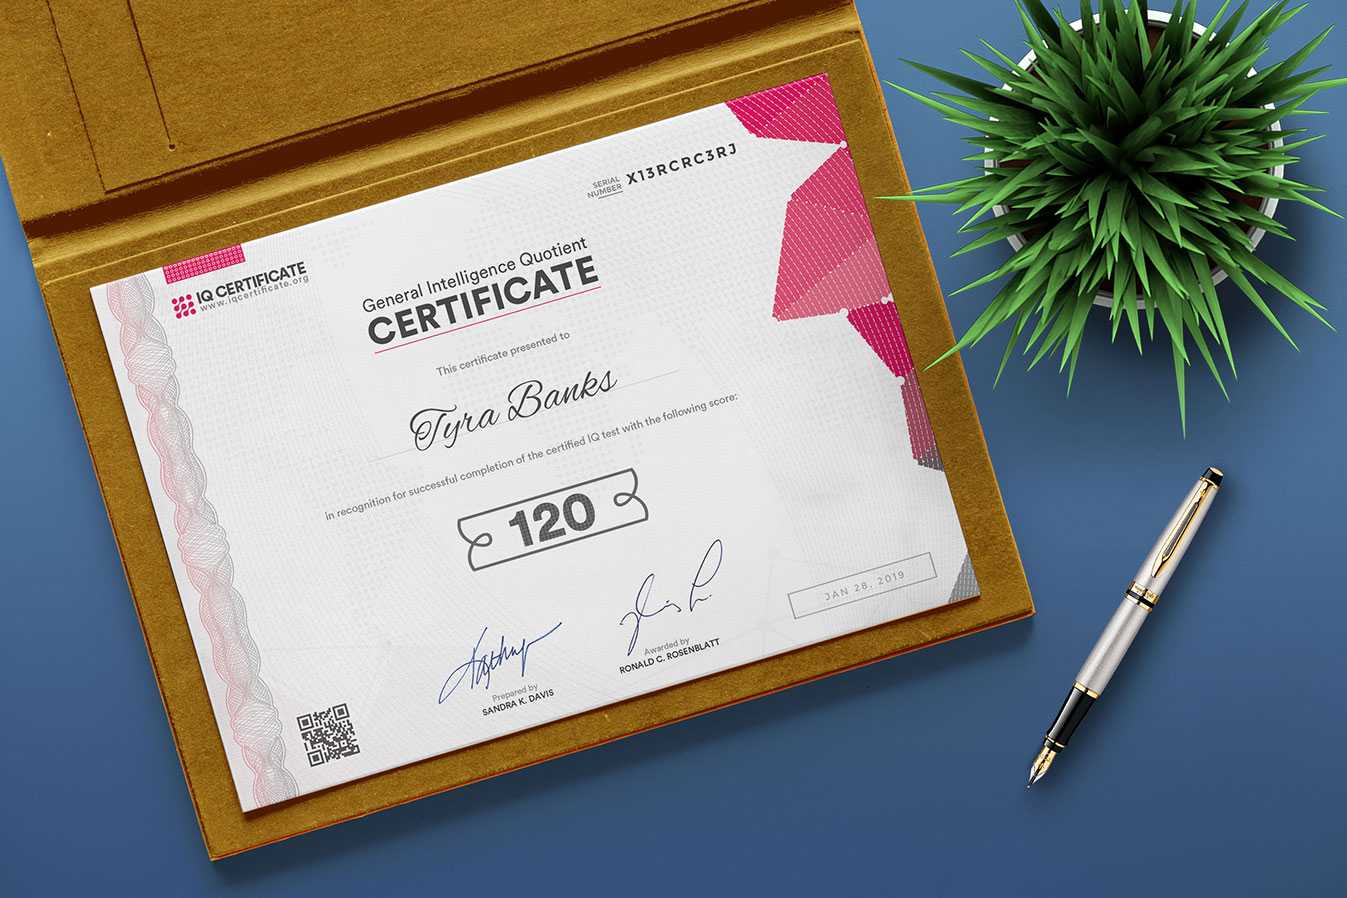 Sample Iq Certificate – Get Your Iq Certificate! Intended For Iq Certificate Template